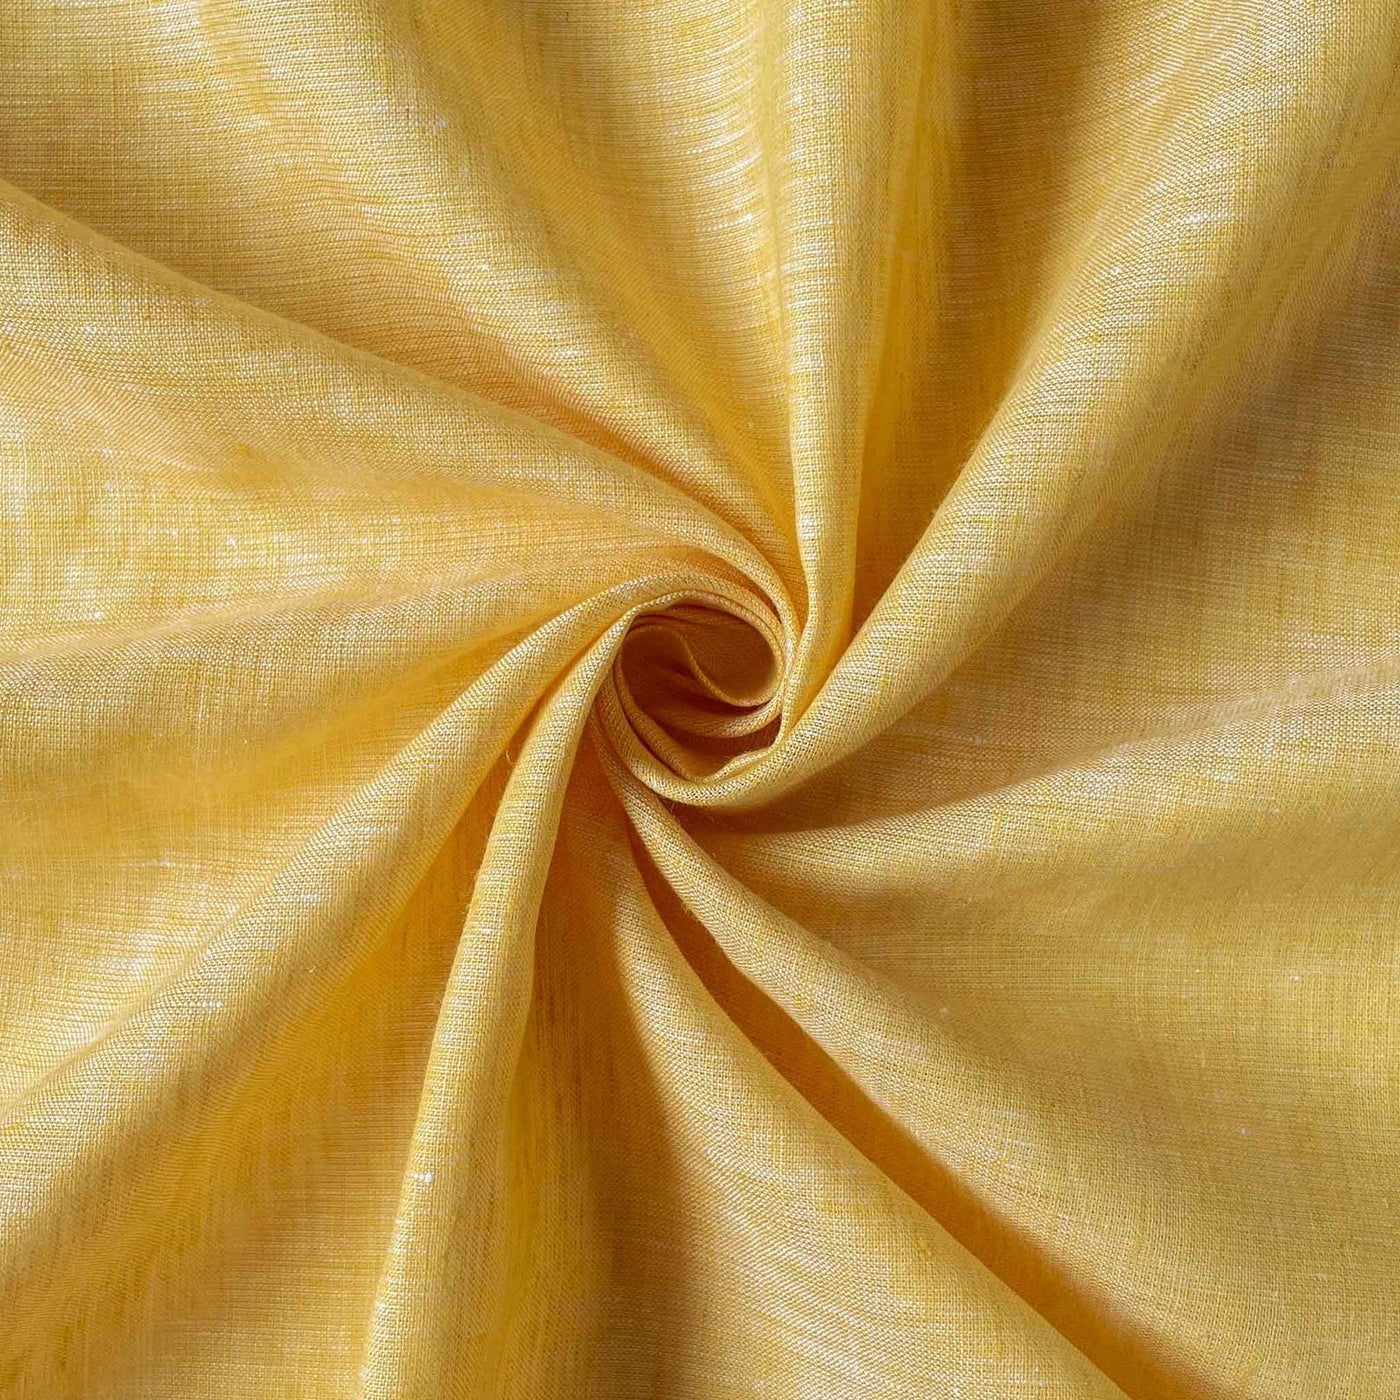 Fabric Pandit Fabric Blooming Yellow Plain Premium 60 Lea Pure Linen Fabric (Width 58 Inches)